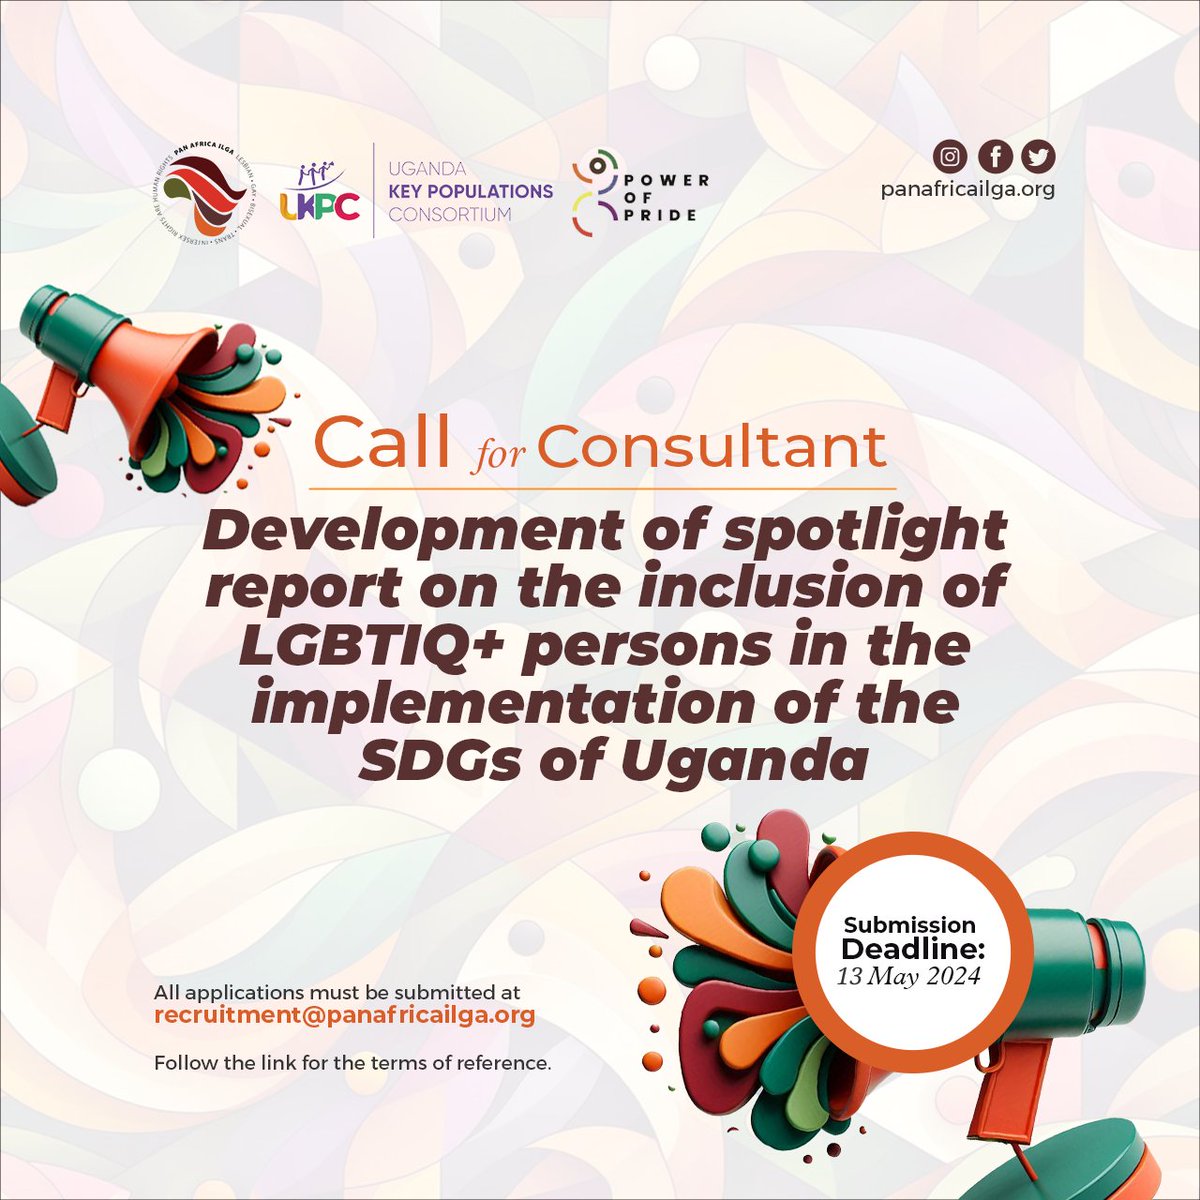 UKPC & @PanAfricaILGA are seeking a consultant to develop a spotlight report on the inclusion of LGBTIQ+ persons in the SDGs of Uganda. 🏳️‍🌈 Check out the poster below for submission guidelines. Know anyone fit? Please share with them this opportunity.